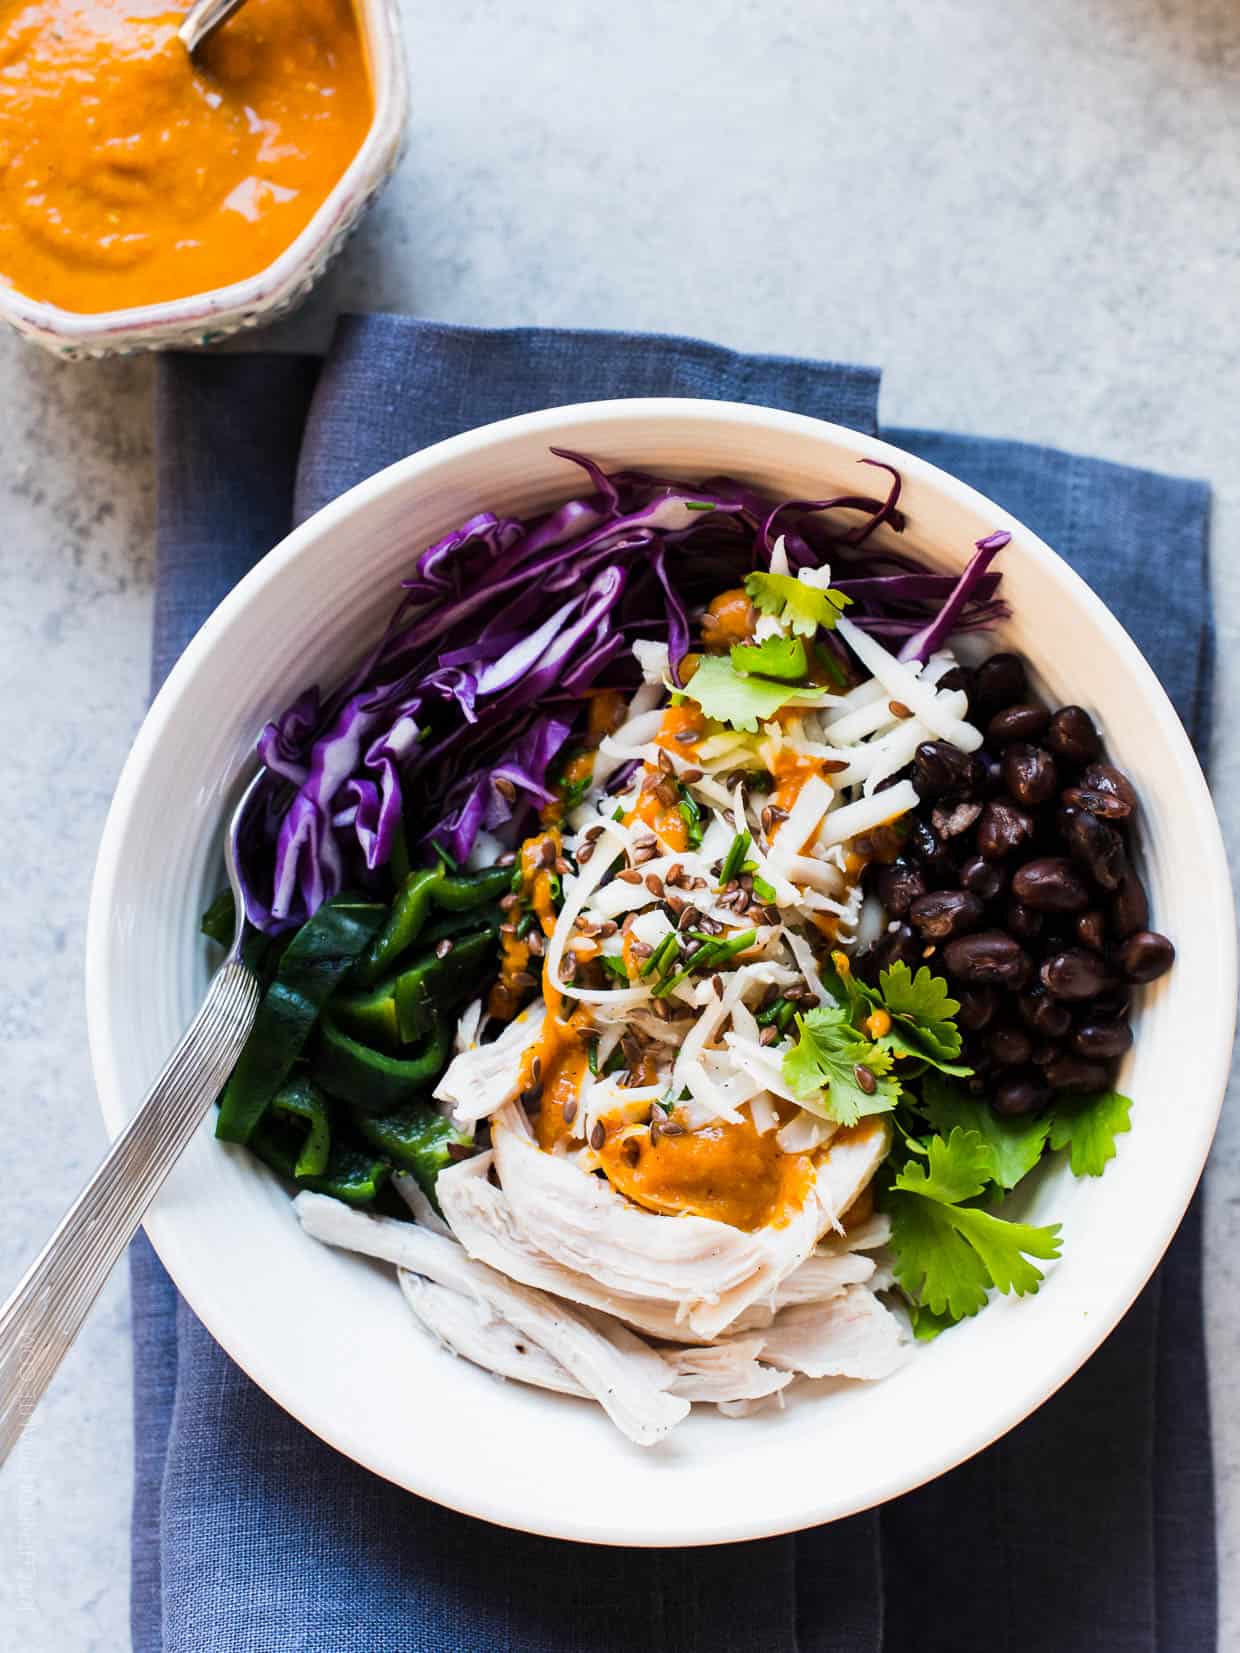 A fresh salad prepared with shredded chicken, cabbage, black beans, charred poblanos, and pumpkin-red curry vinaigrette served in a white bowl.